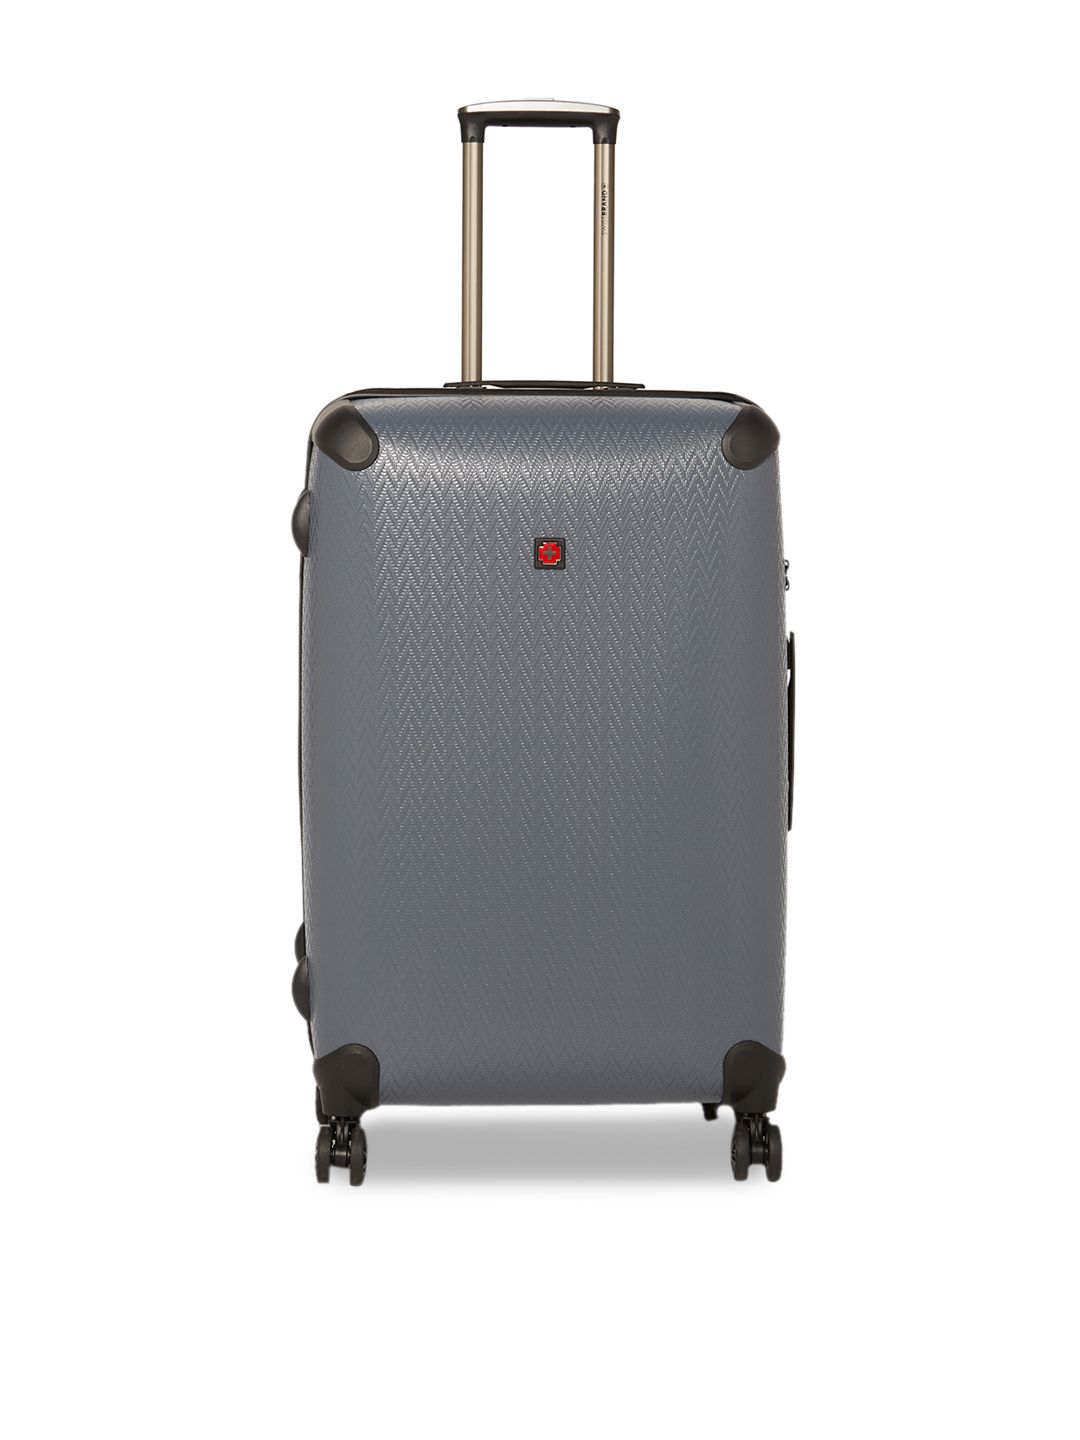 SWISS BRAND Grey Solid ETOY 360-Degree Rotation Hard-Sided Large Trolley Suitcase Price in India